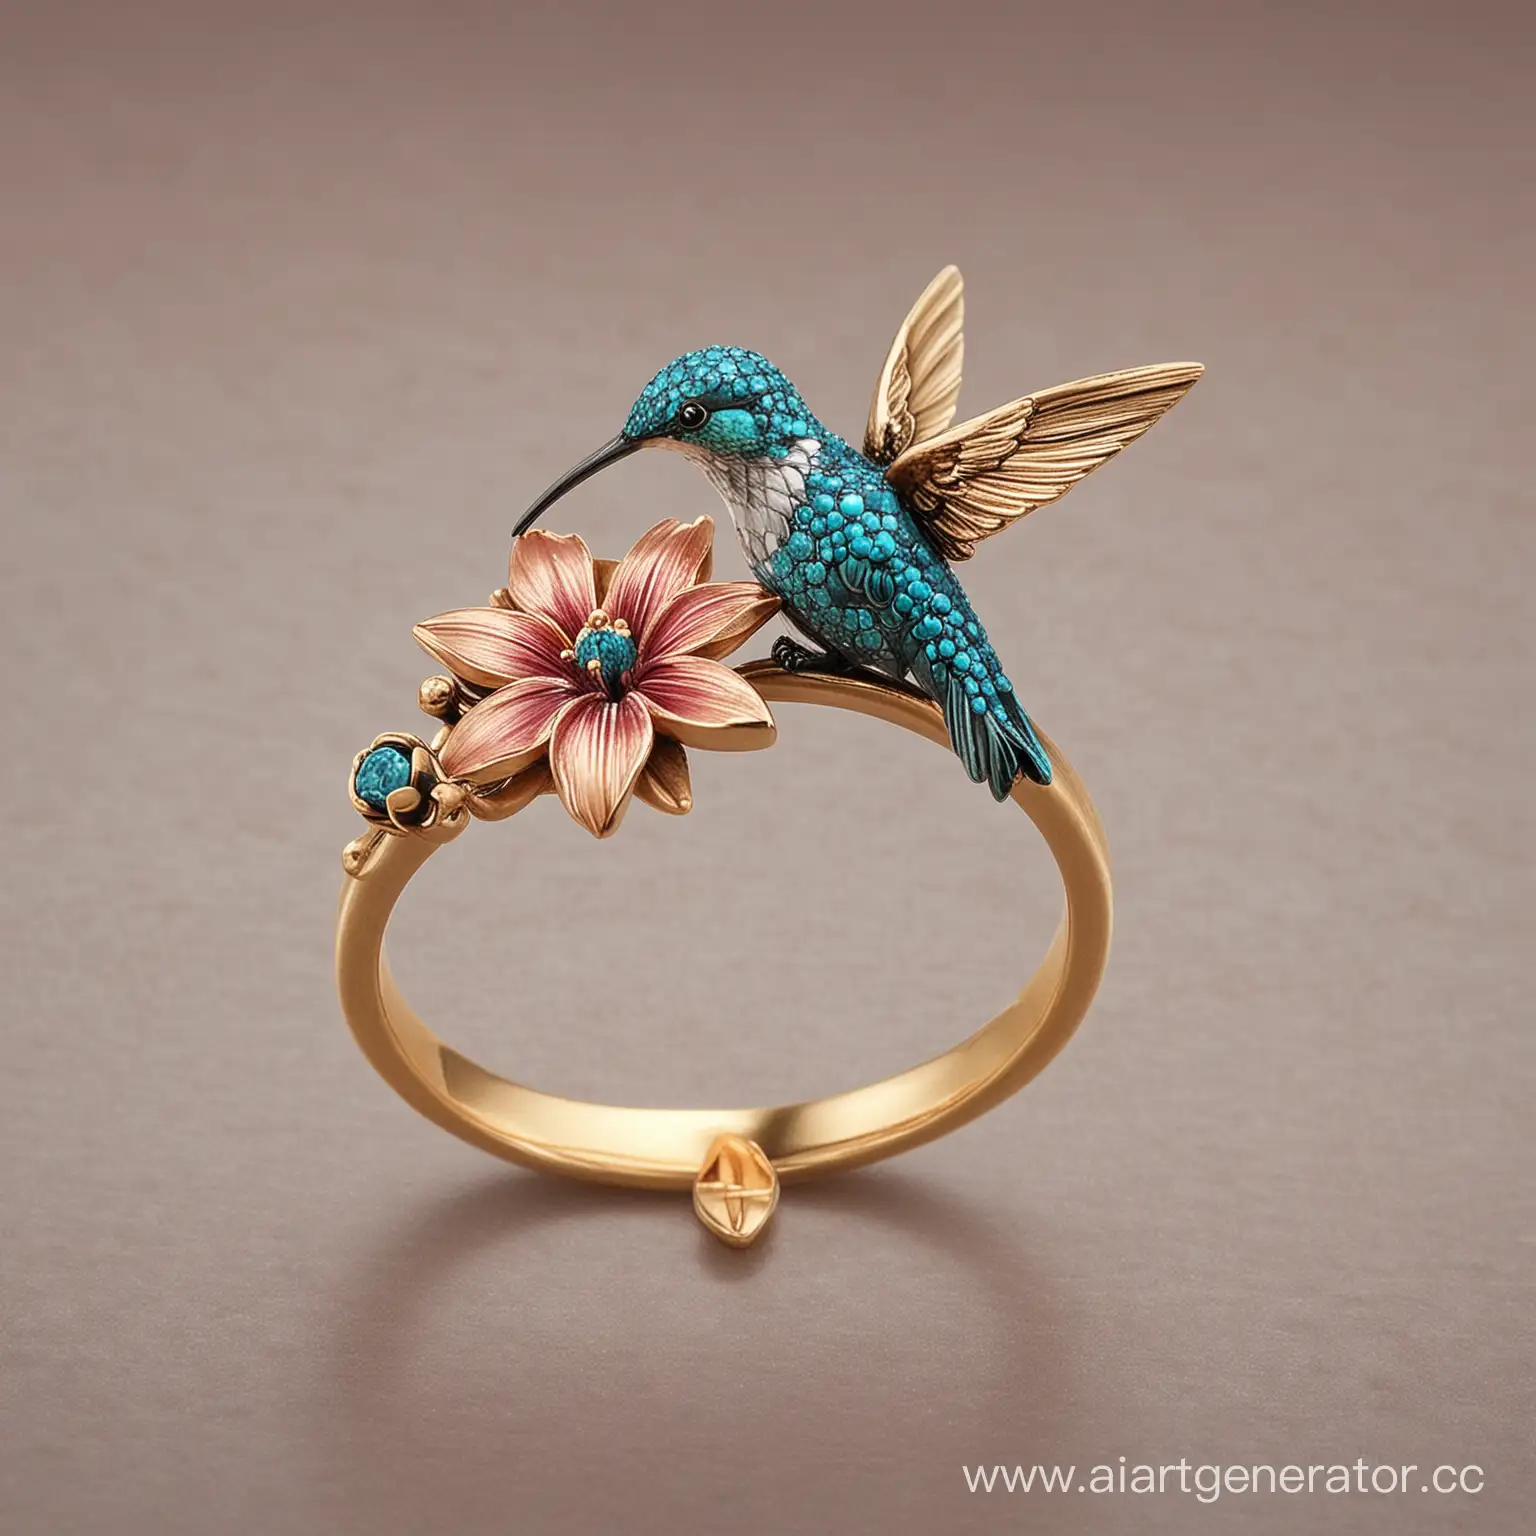 a ring with a hummingbird and a single flower